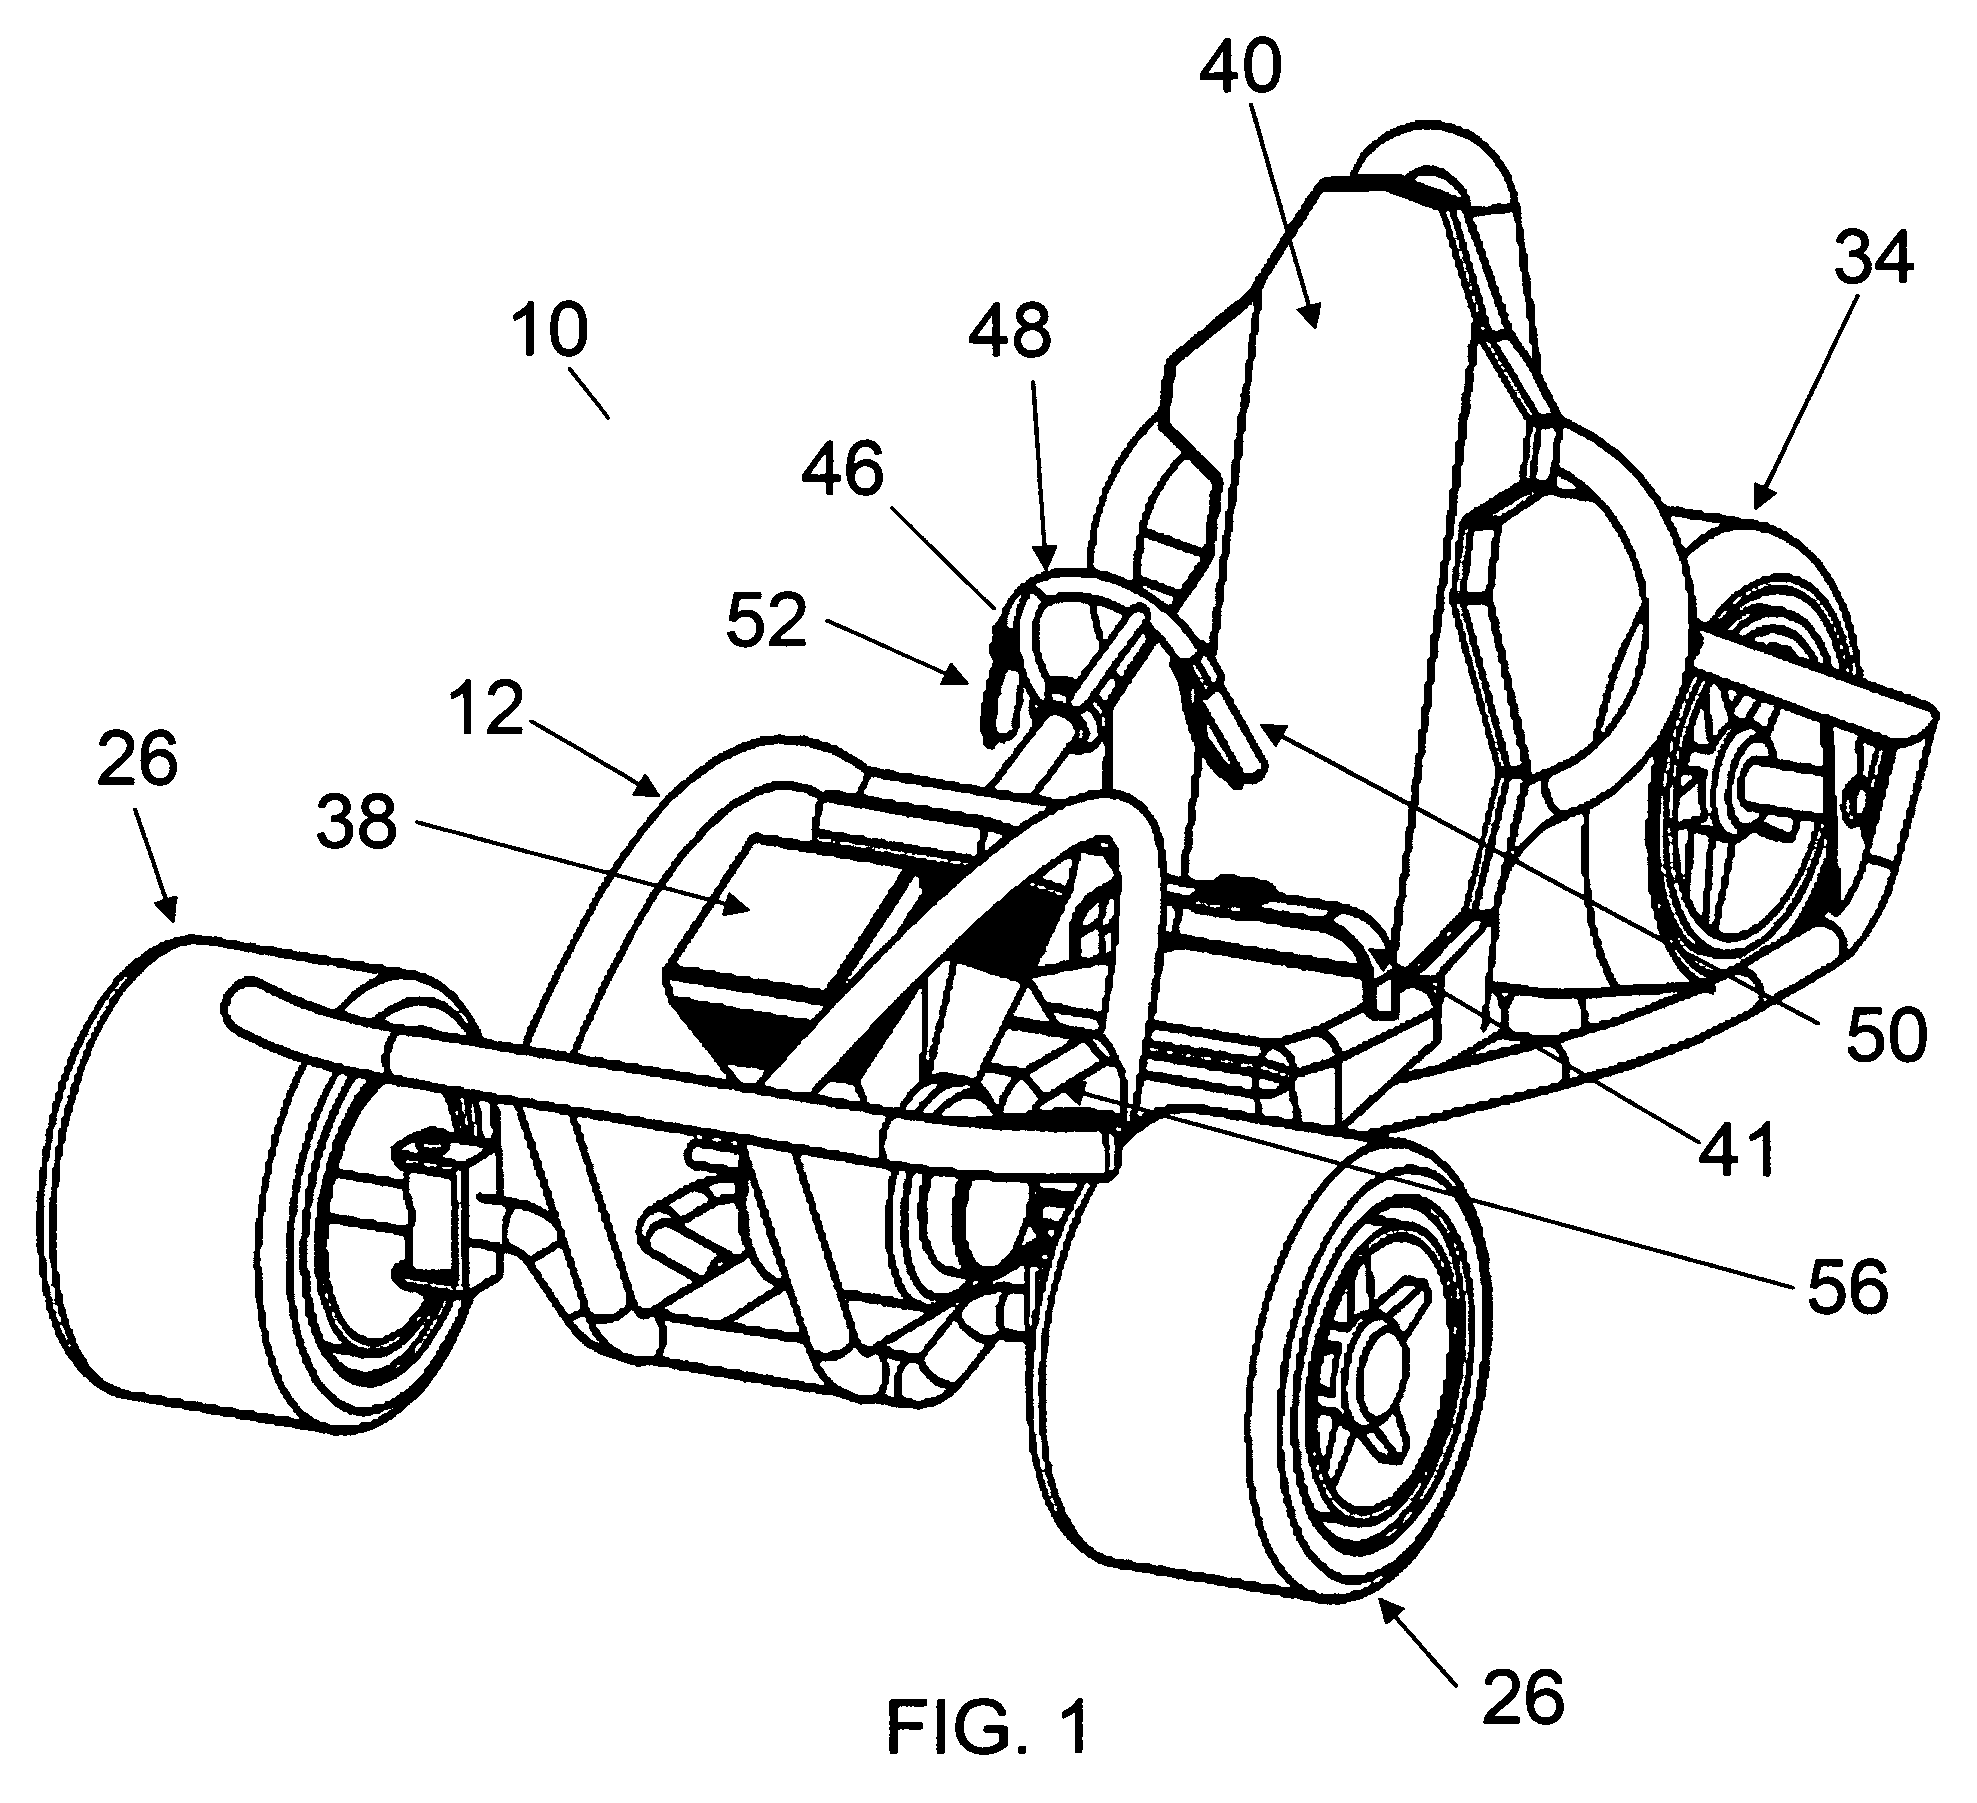 Three-wheeled vehicle with centrally positioned motor and driver's seat